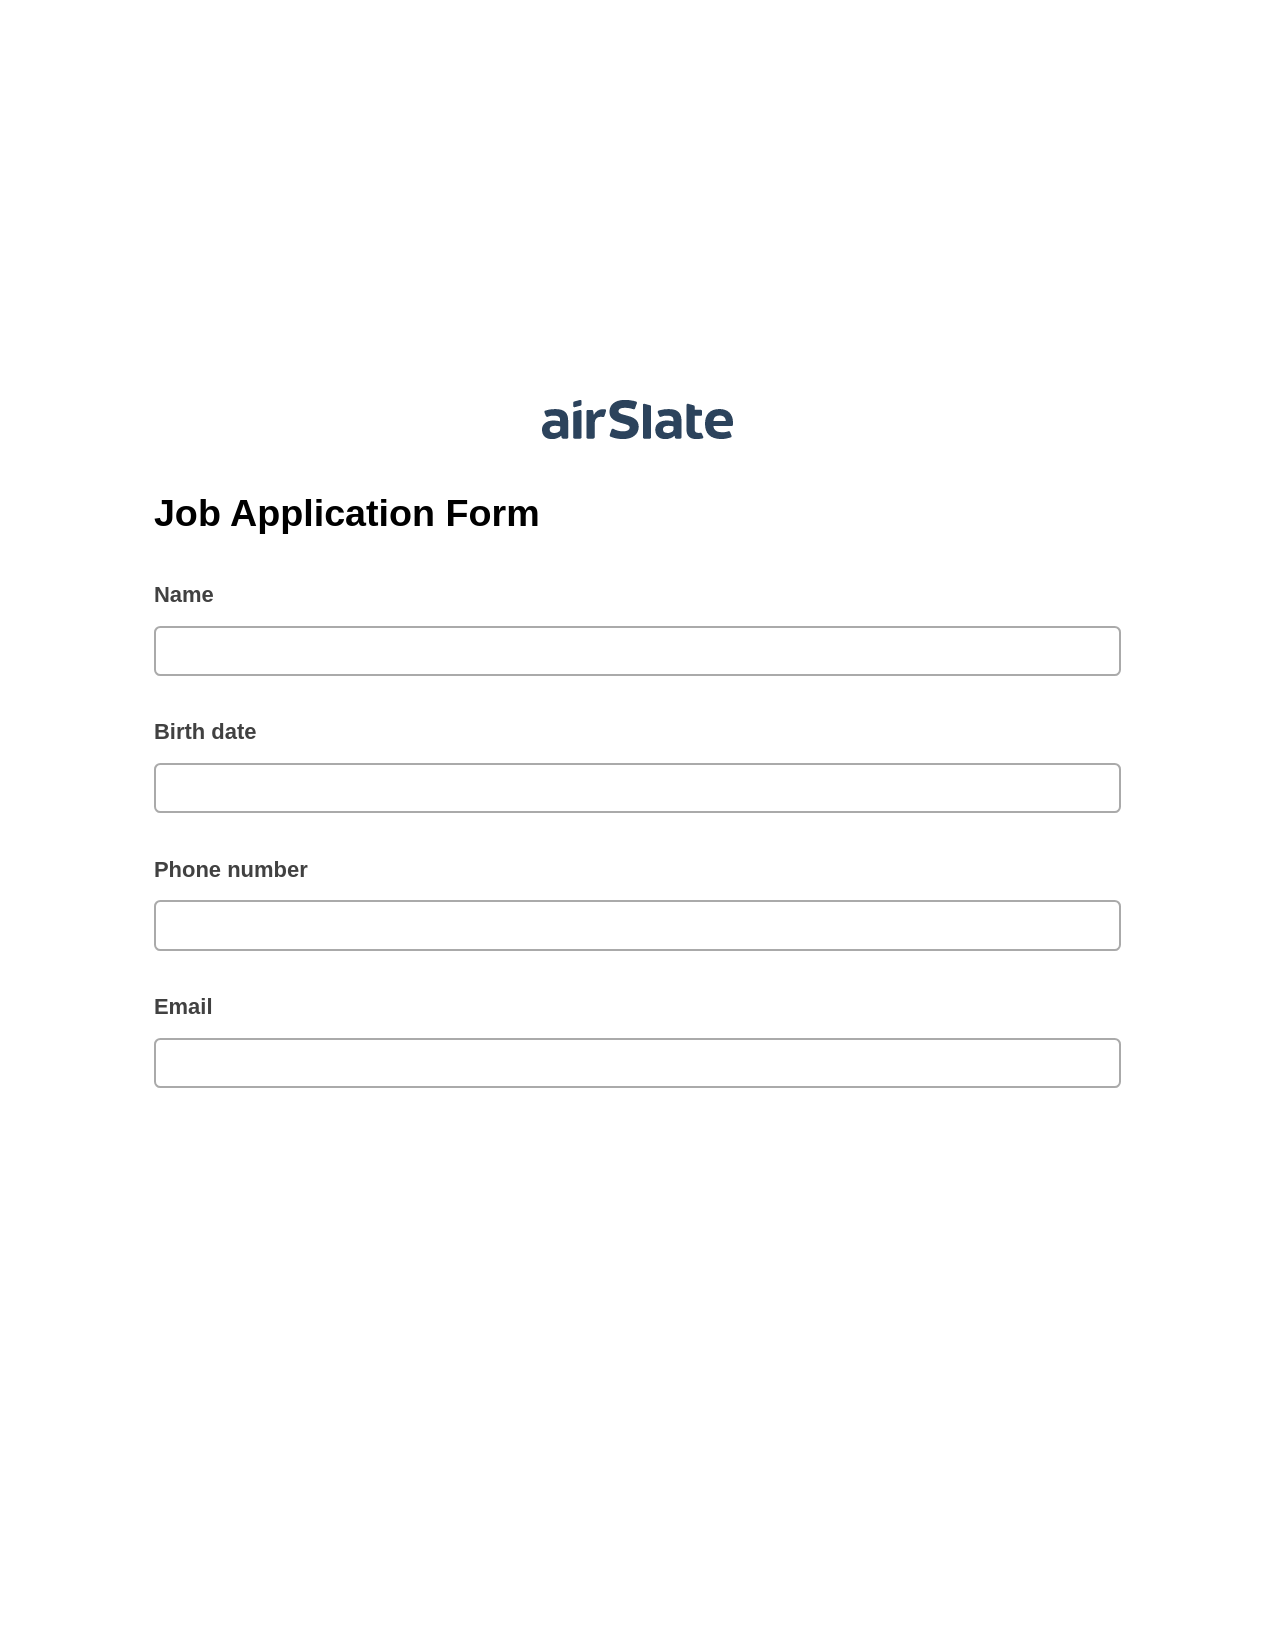 Job Application Form Pre-fill from Excel Spreadsheet Bot, Create slate bot, Export to Smartsheet